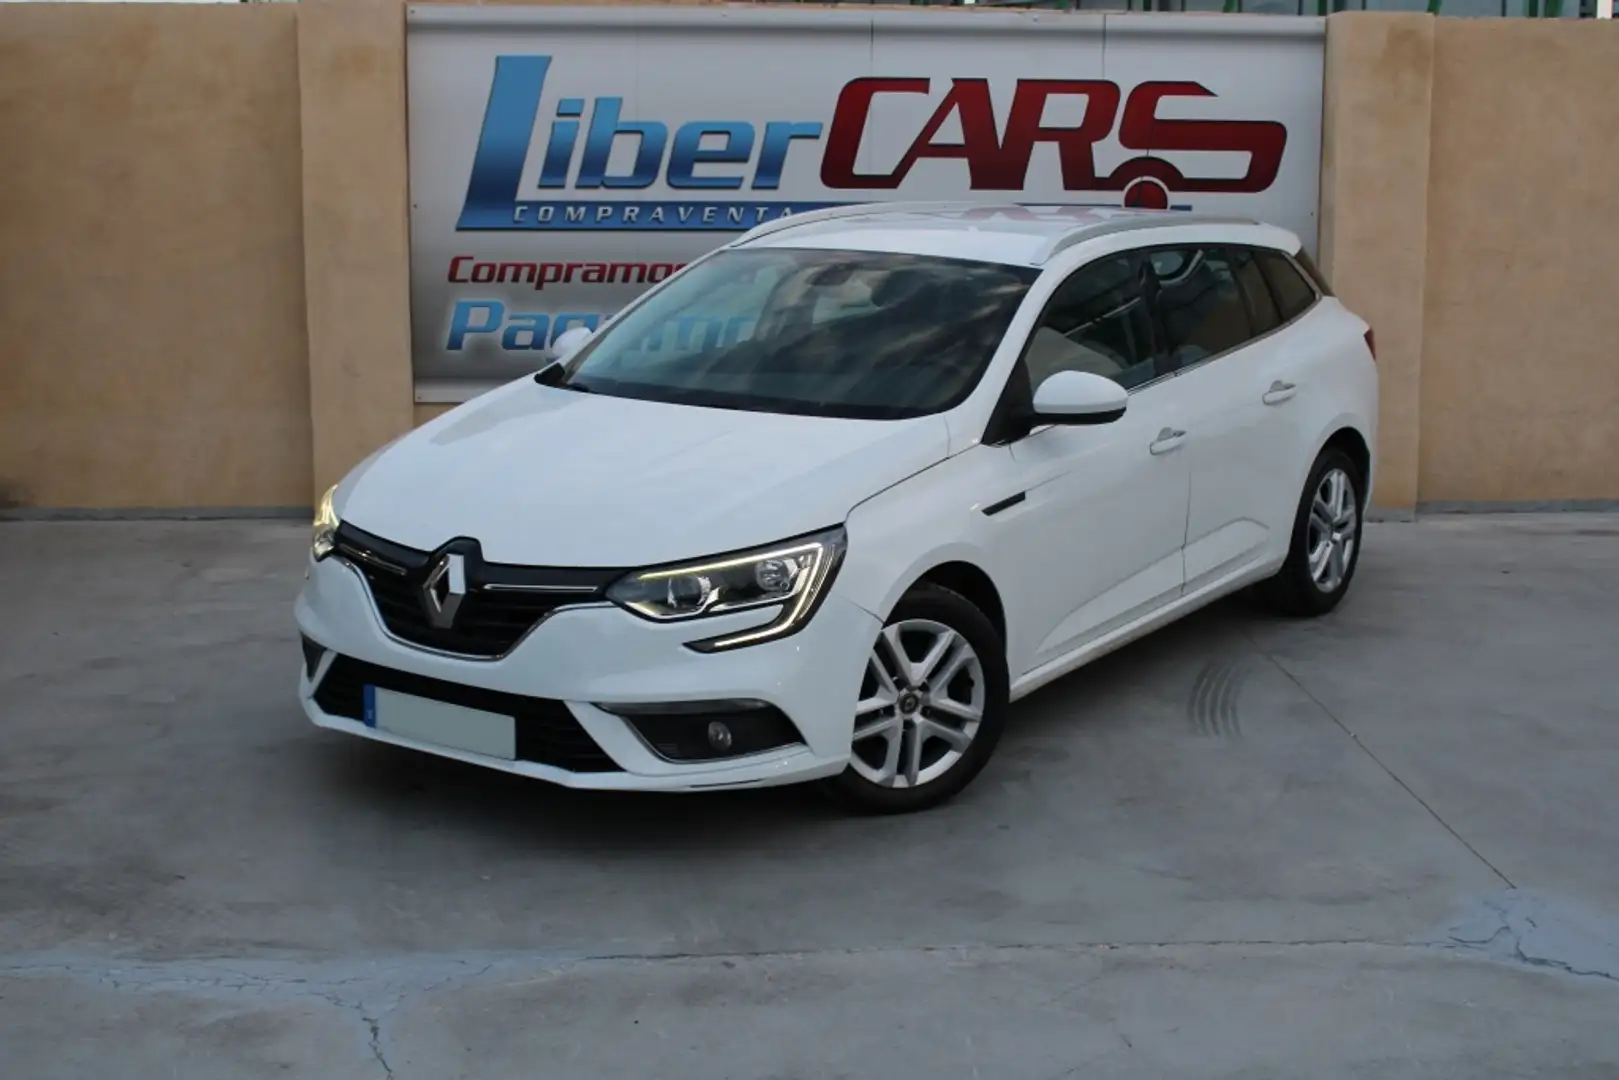 Renault Megane S.T. 1.5dCi Energy Business 81kW Wit - 2